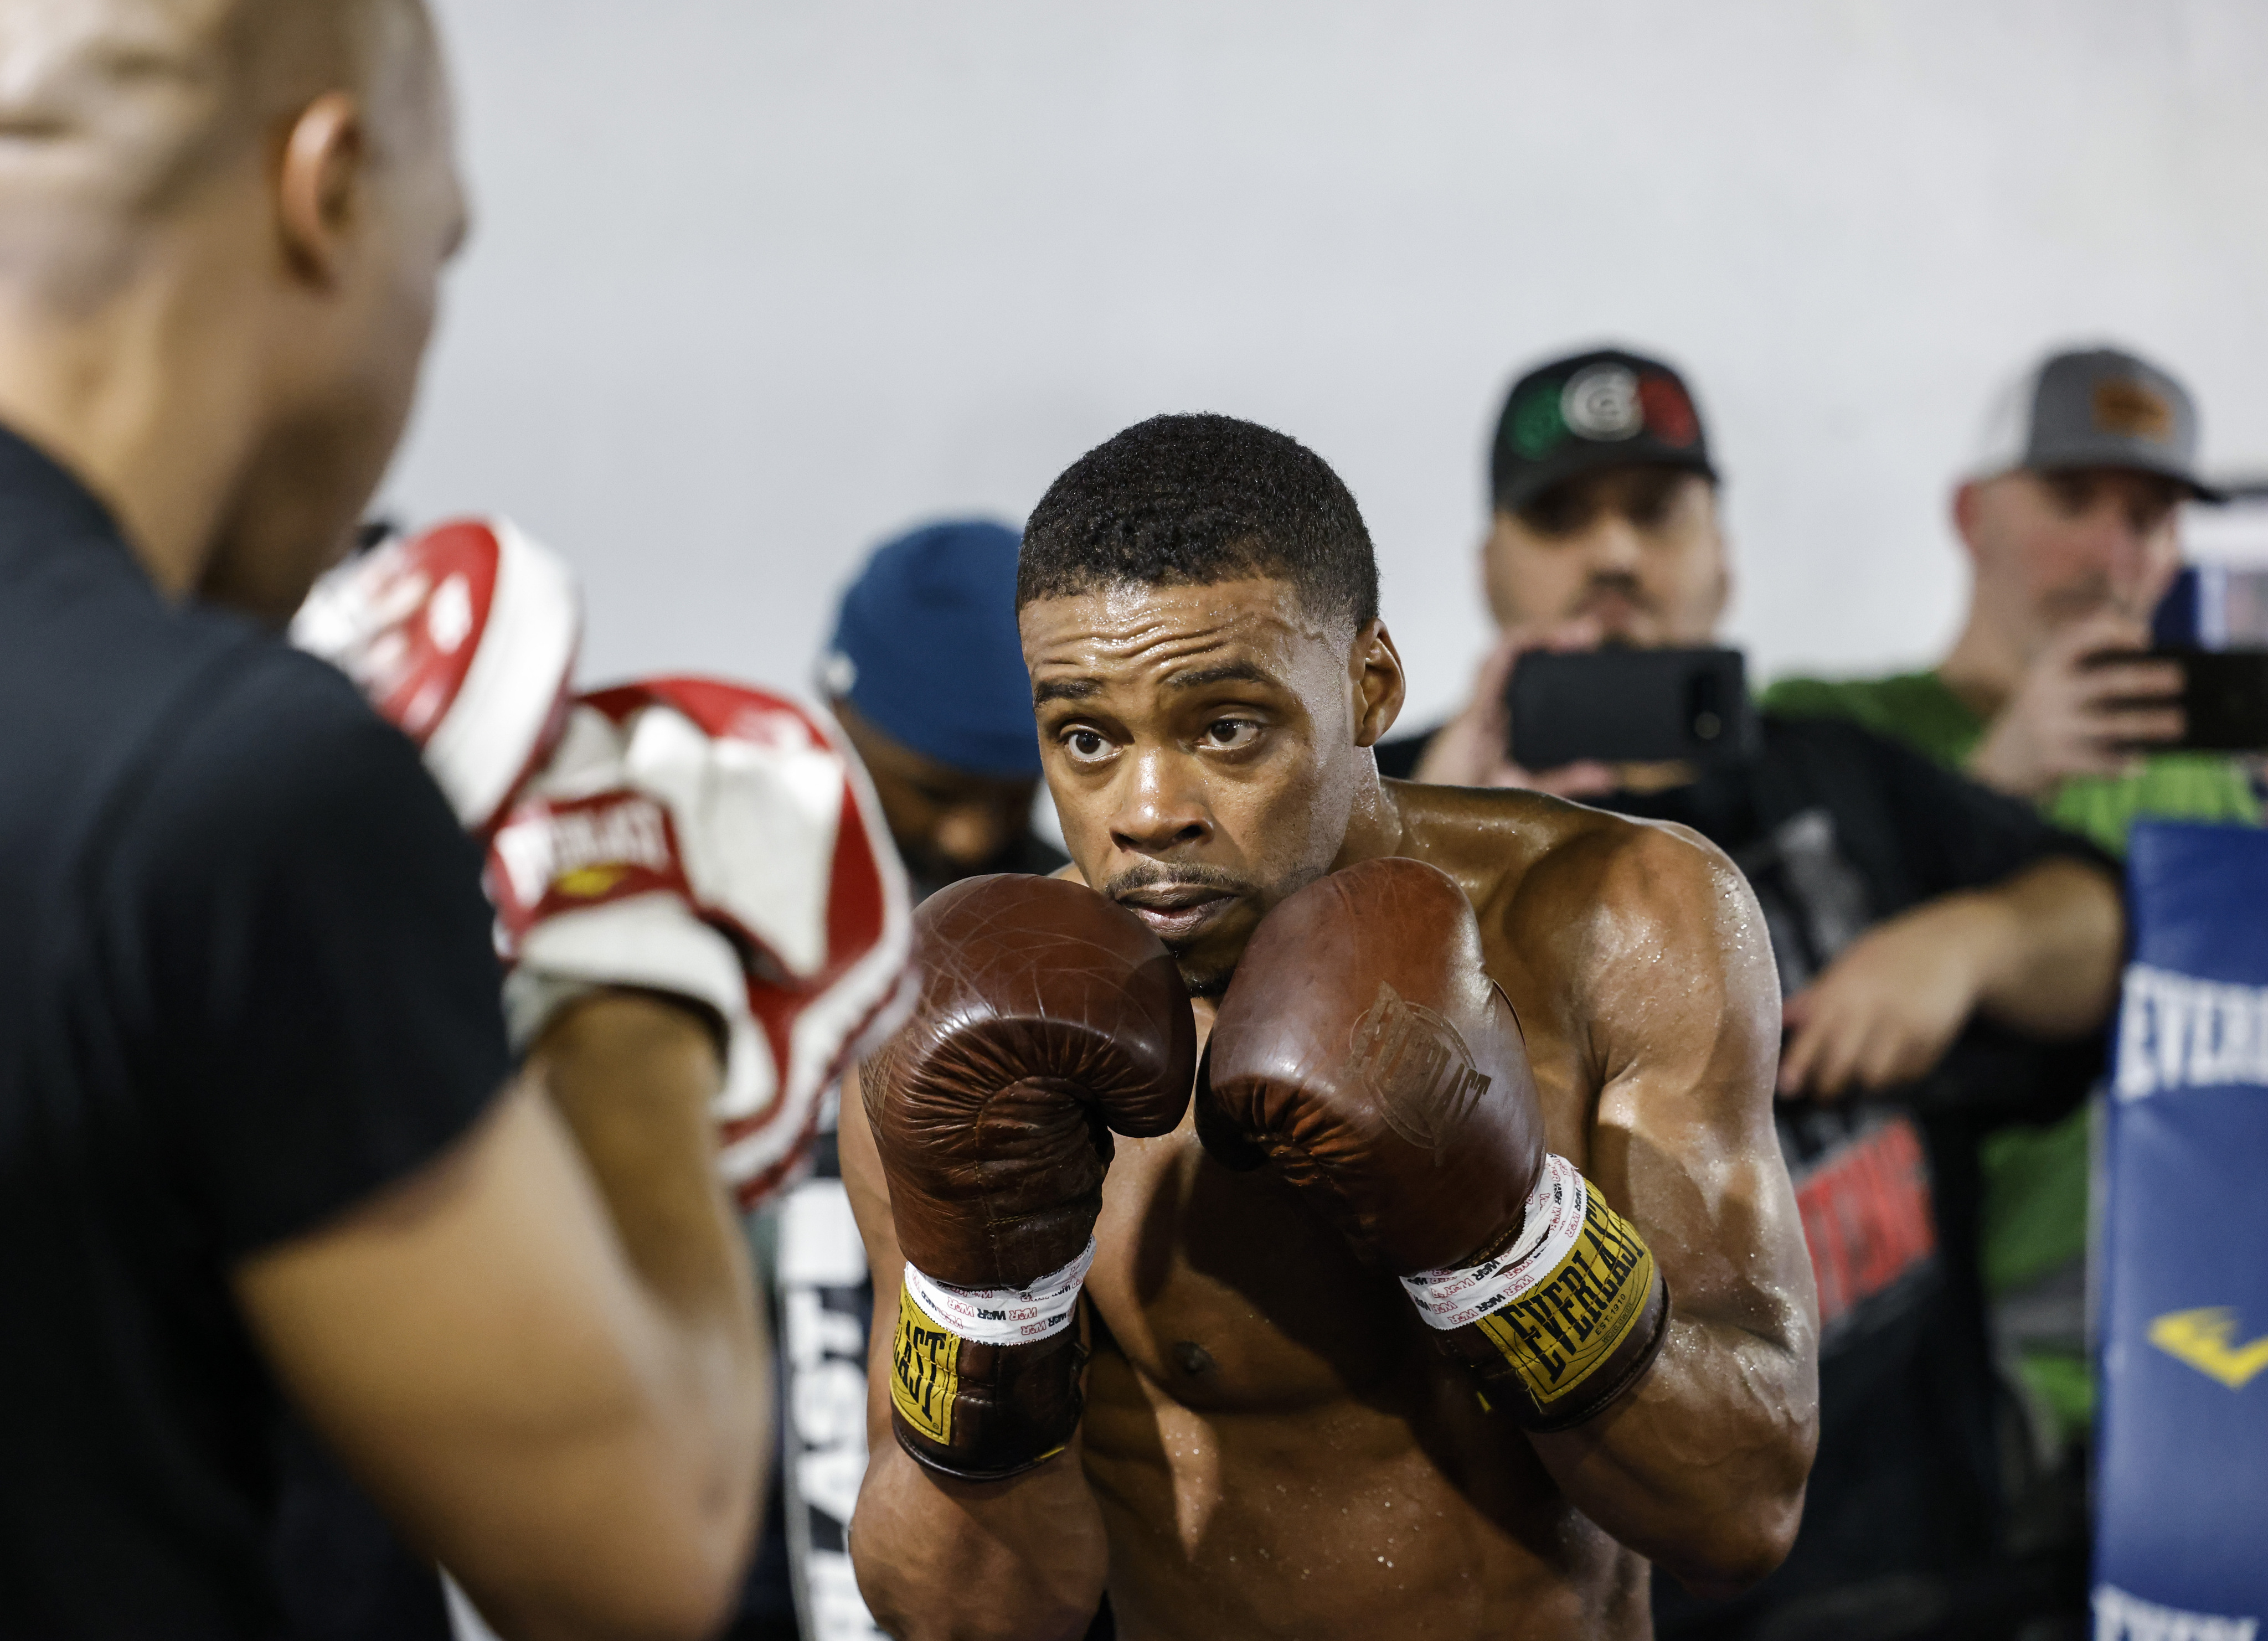 It took 3 years of build-up, but bond forged between Errol Spence Jr